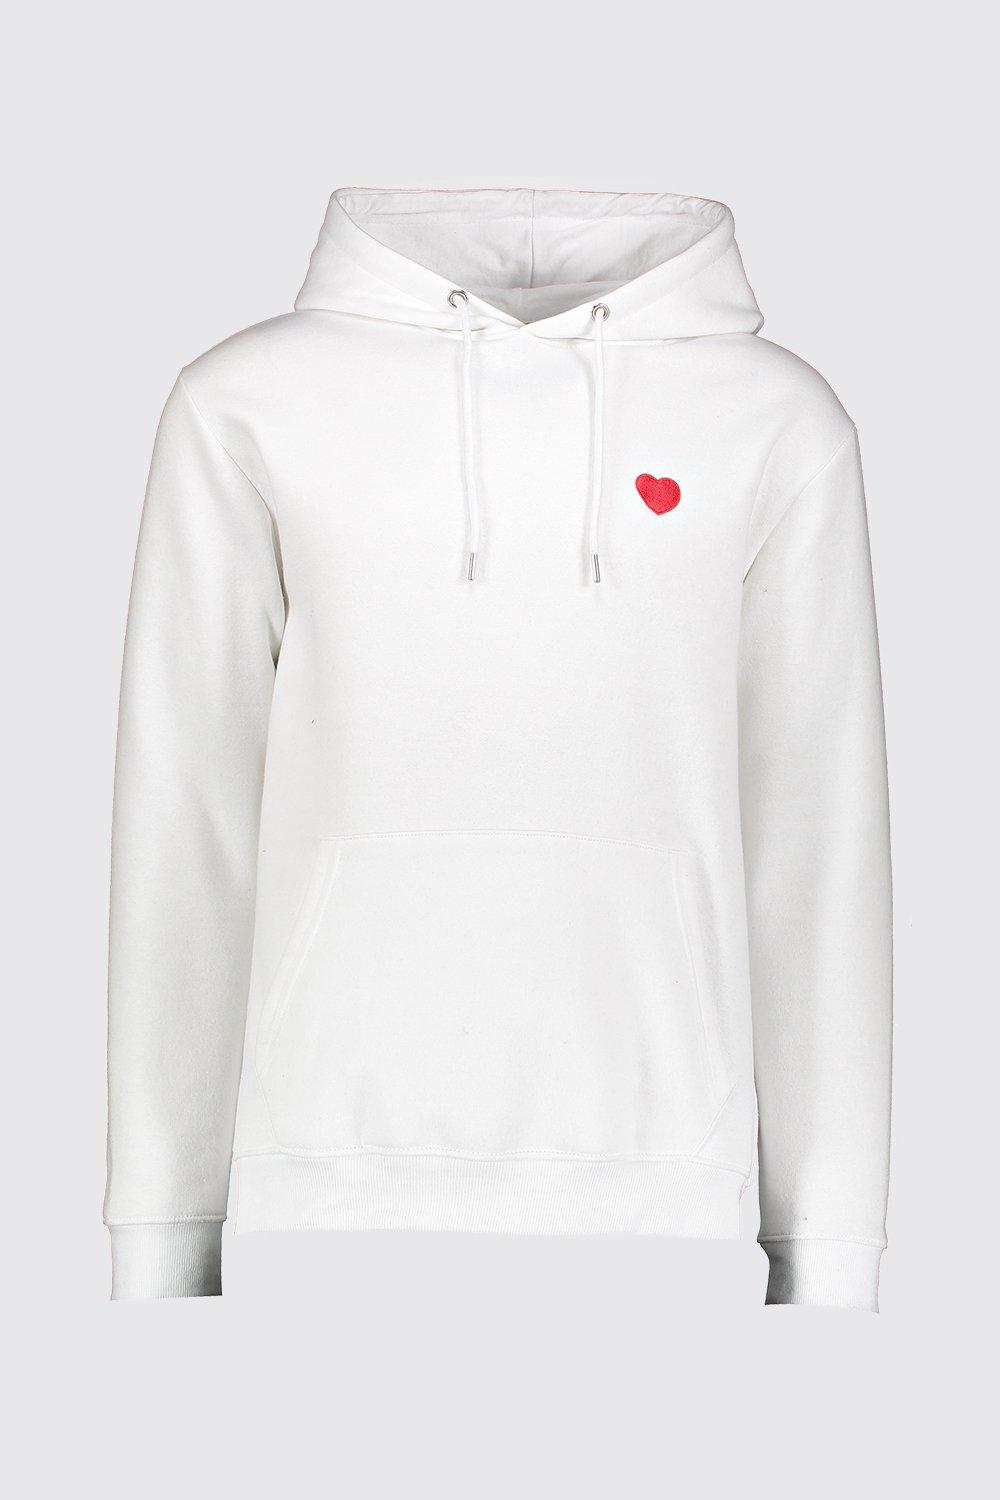 white embroidered hoodie